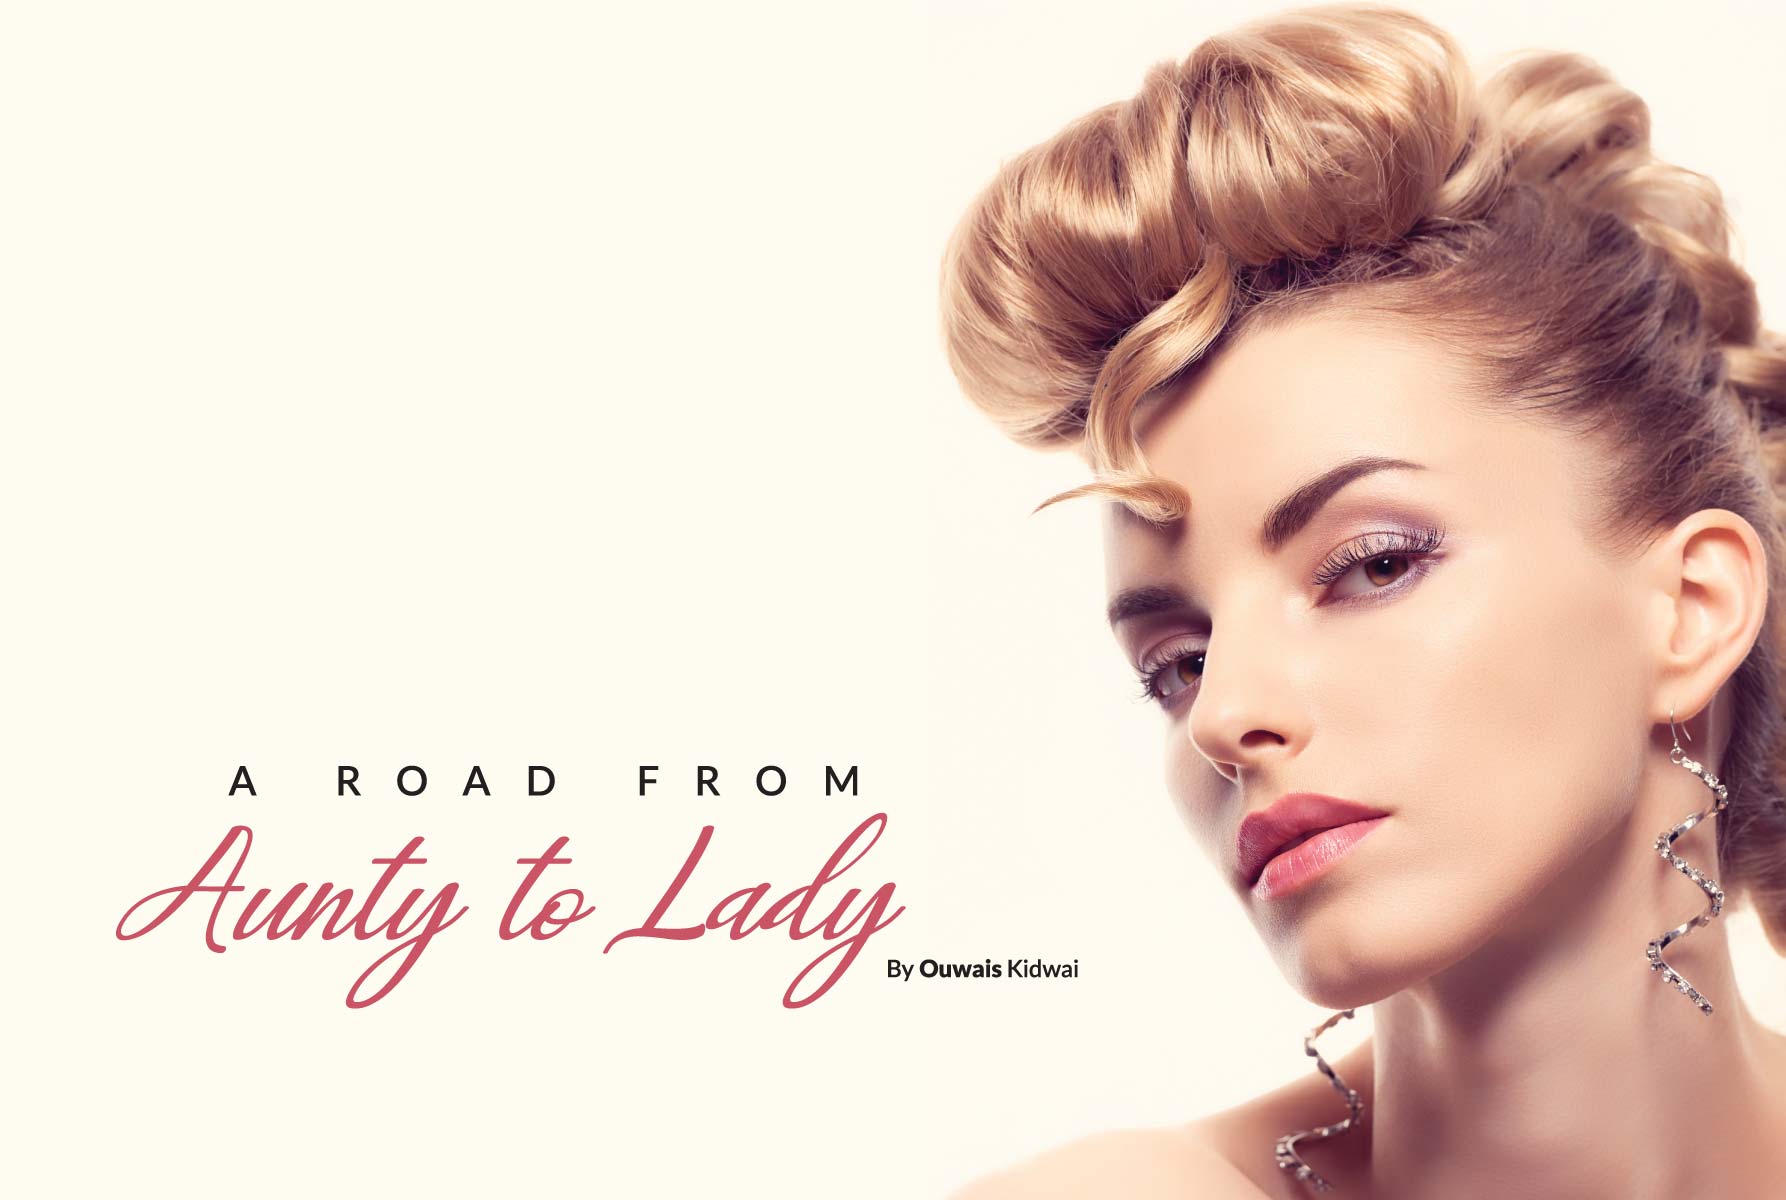 A Road from Aunty to Lady